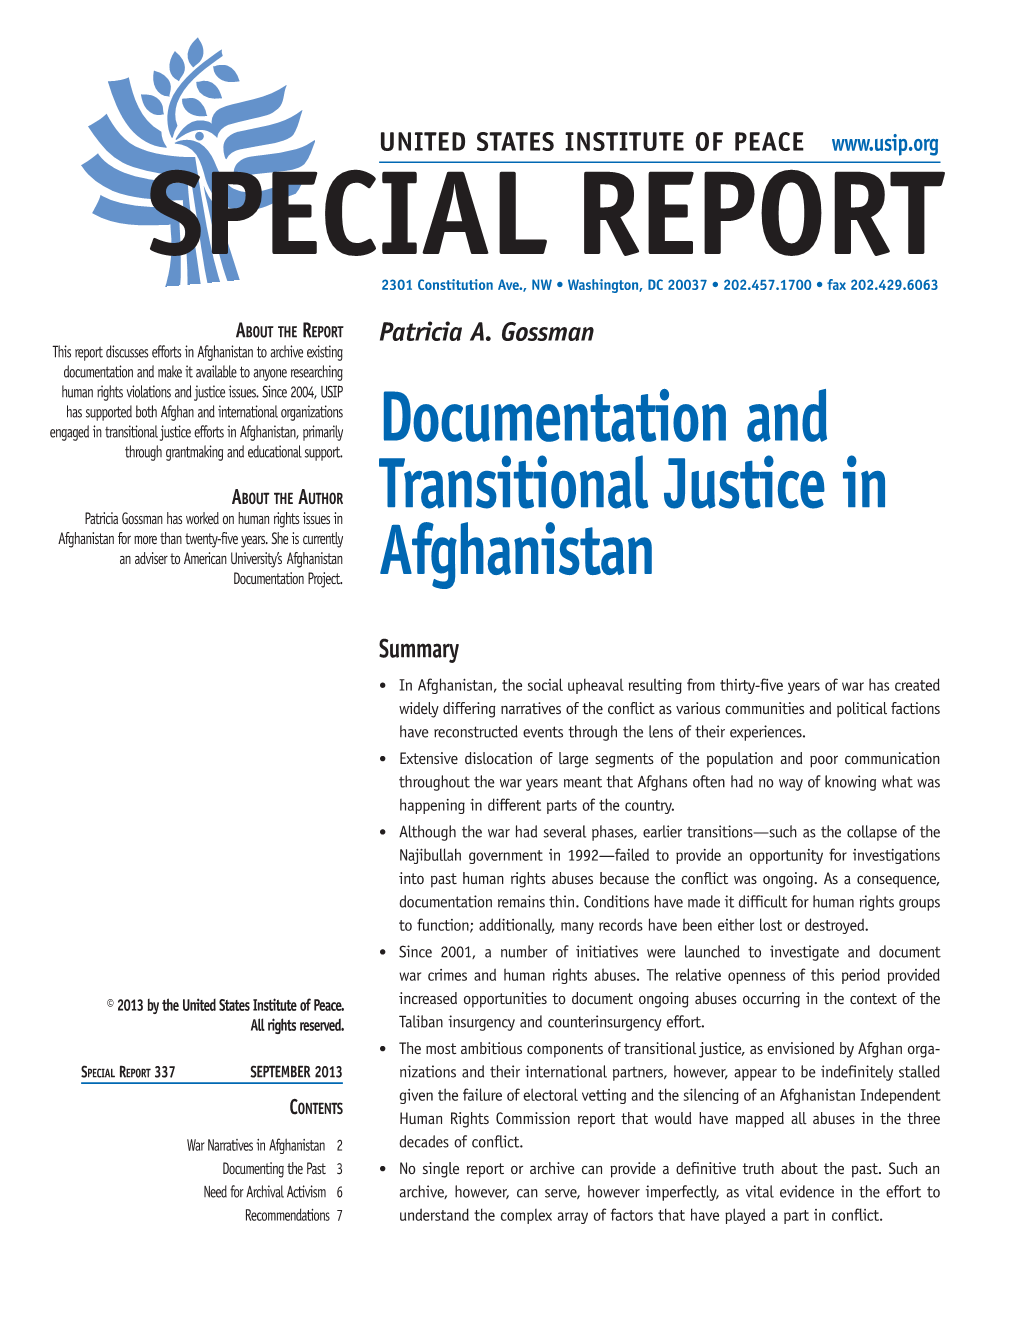 Documentation and Transitional Justice in Afghanistan